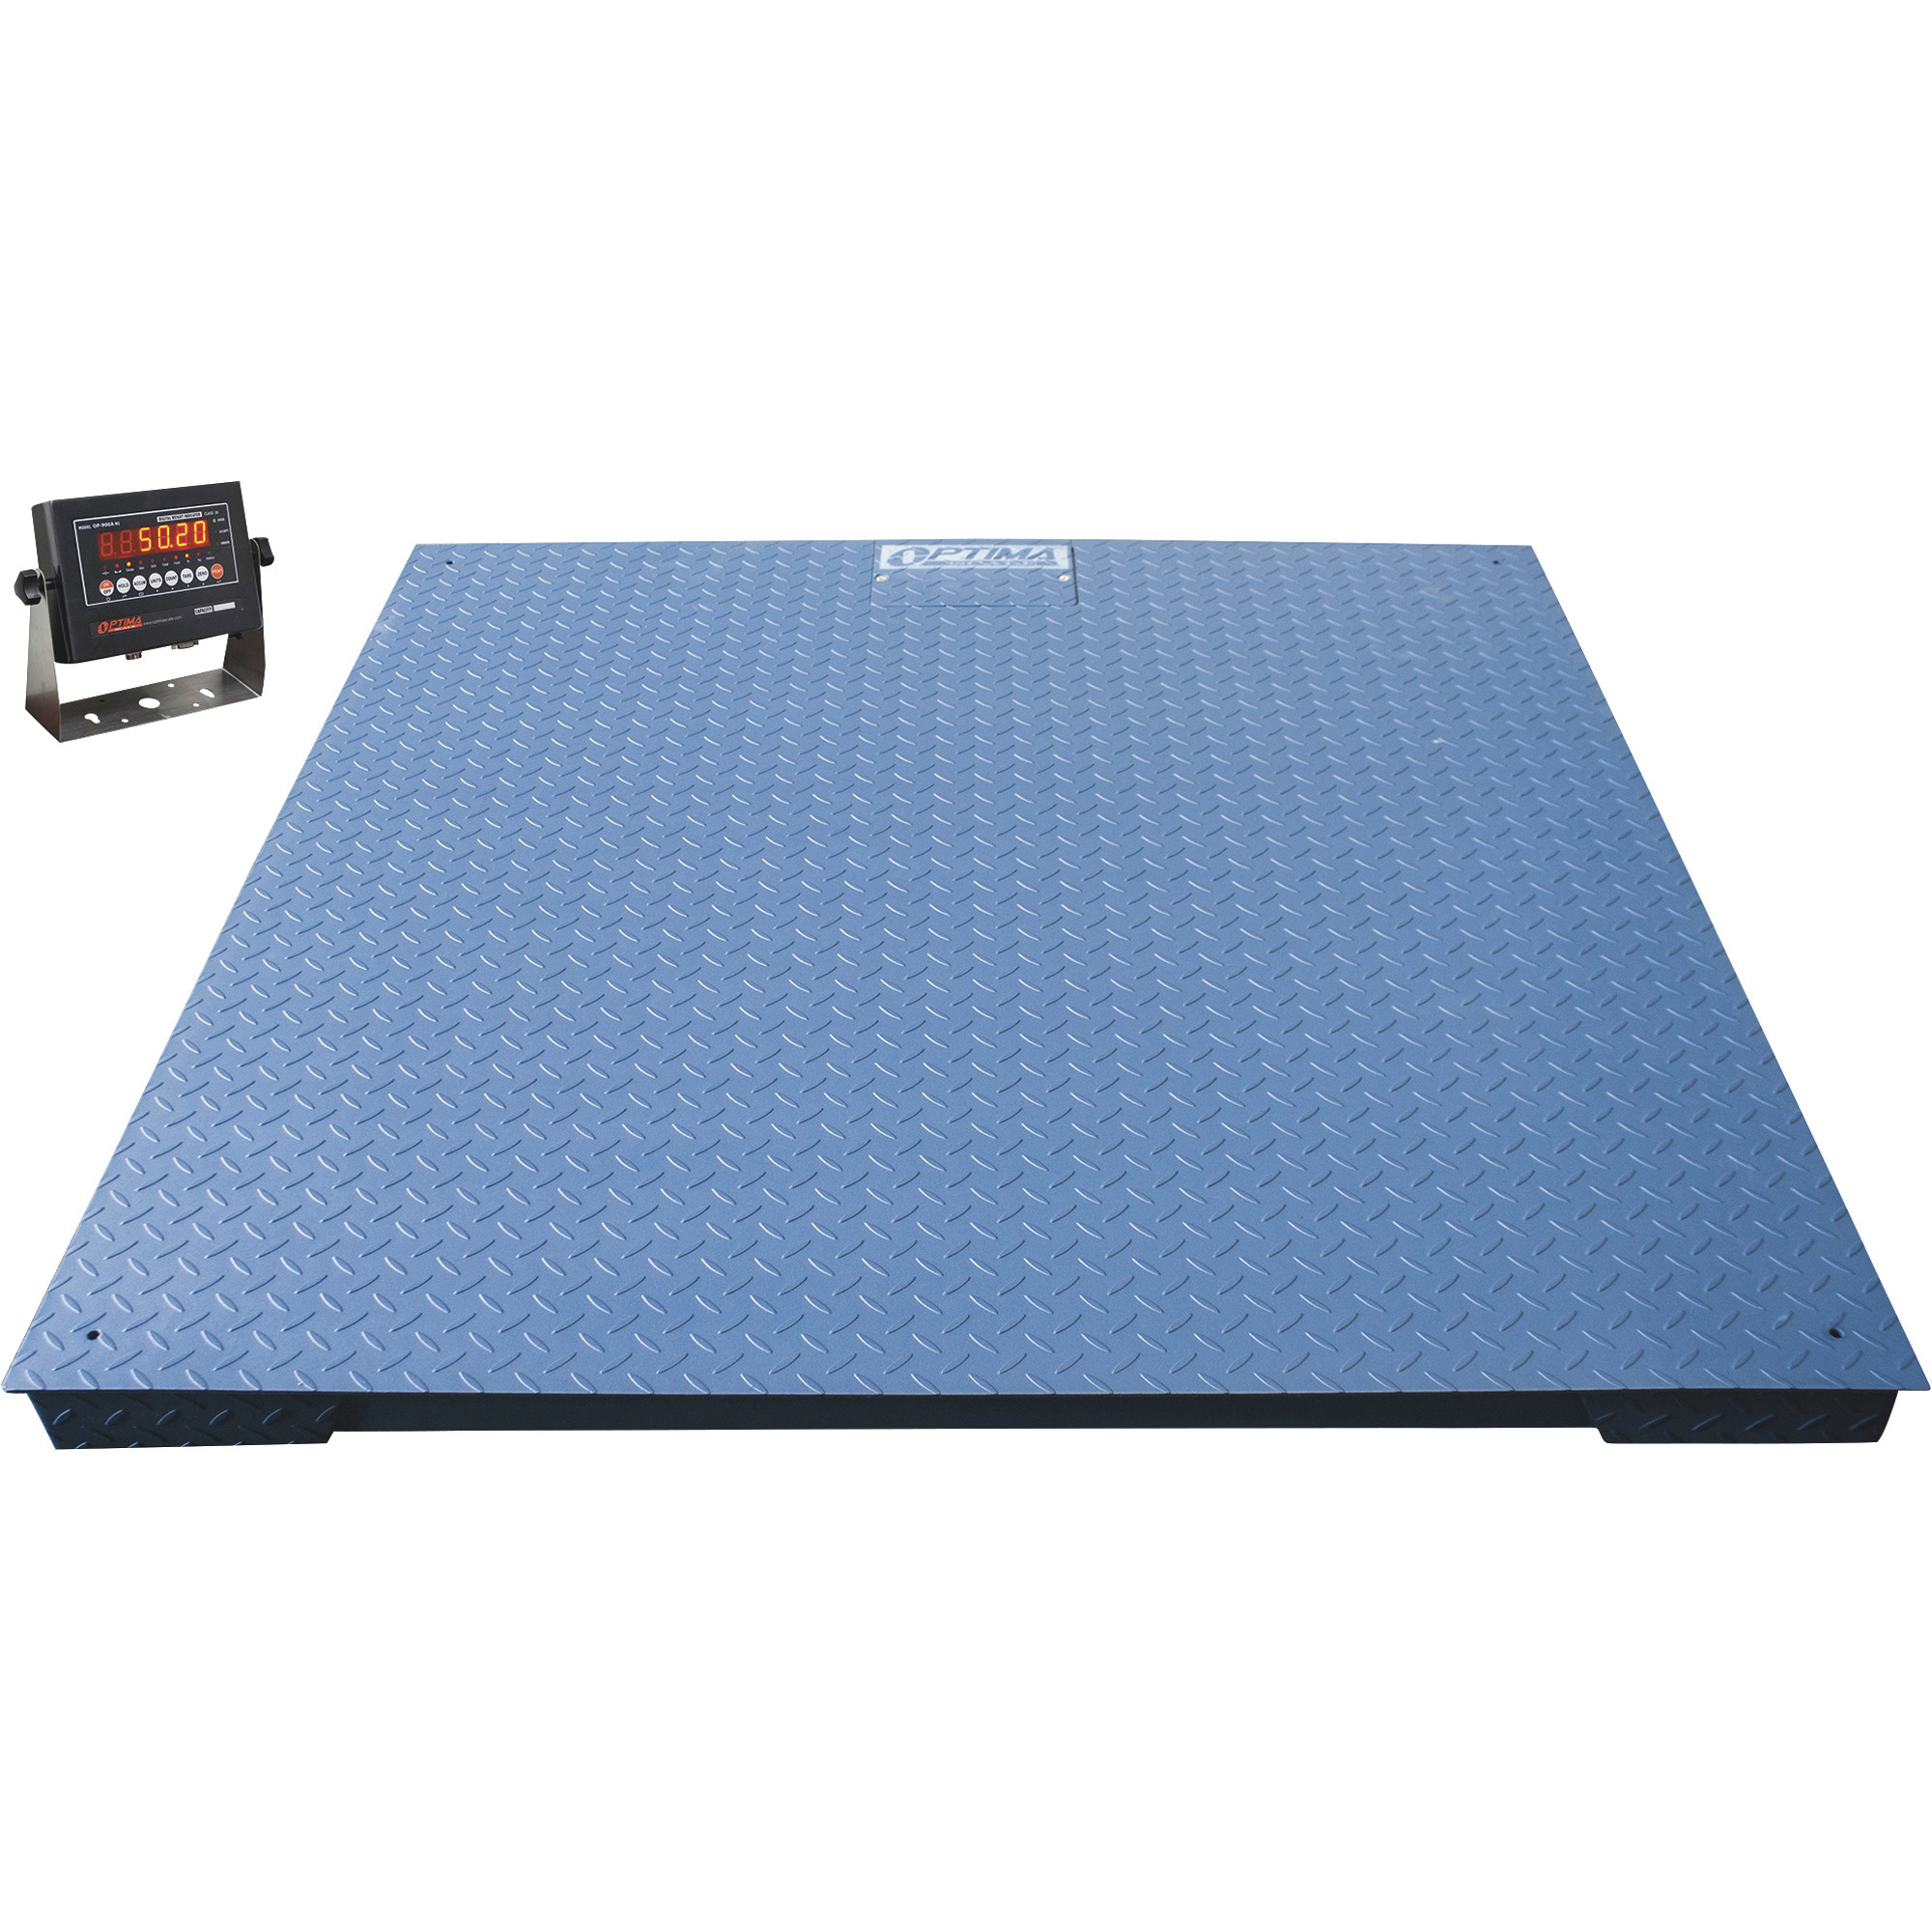 Optima Scale 60Inch x 60Inch Industrial Floor Scale — 5000-Lb. Weight Capacity, 1-lb. Display Increments, Model OP-916-5X5-5K -  OptimaScale